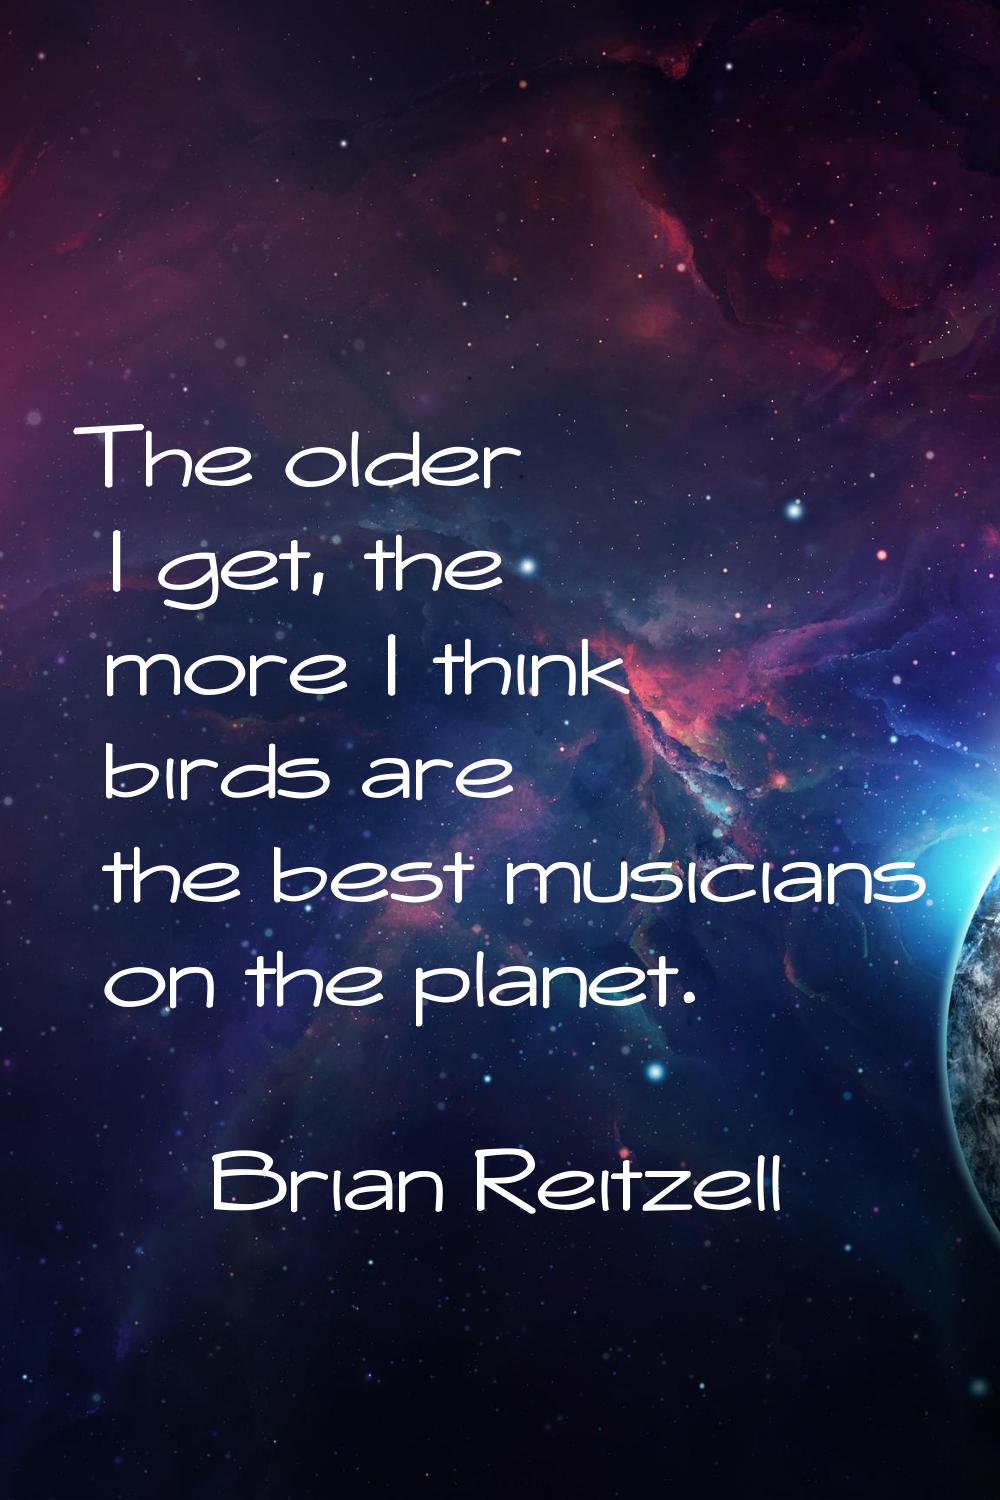 The older I get, the more I think birds are the best musicians on the planet.